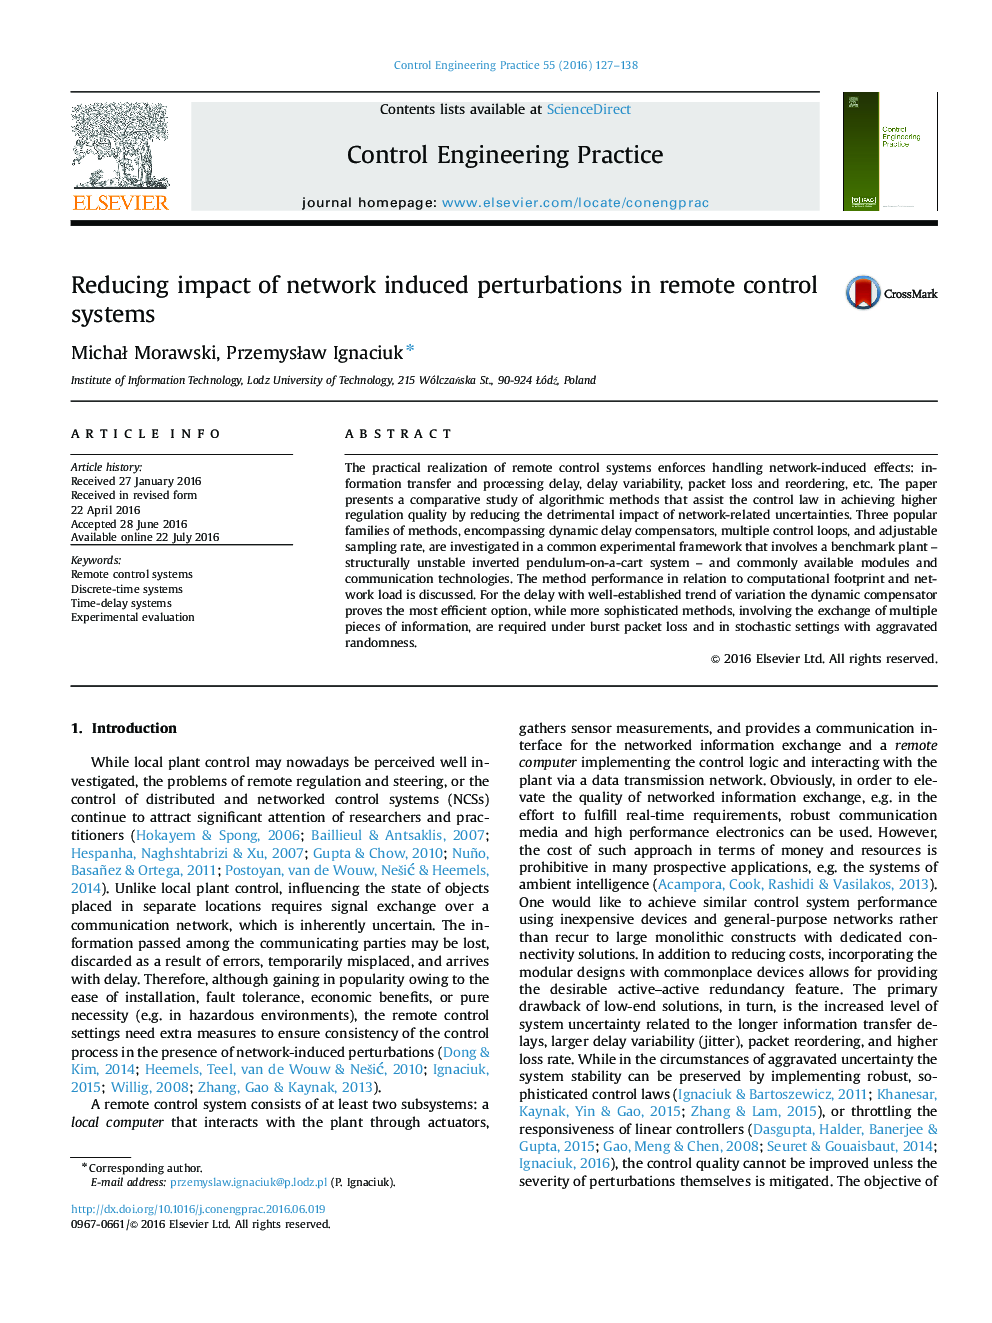 Reducing impact of network induced perturbations in remote control systems